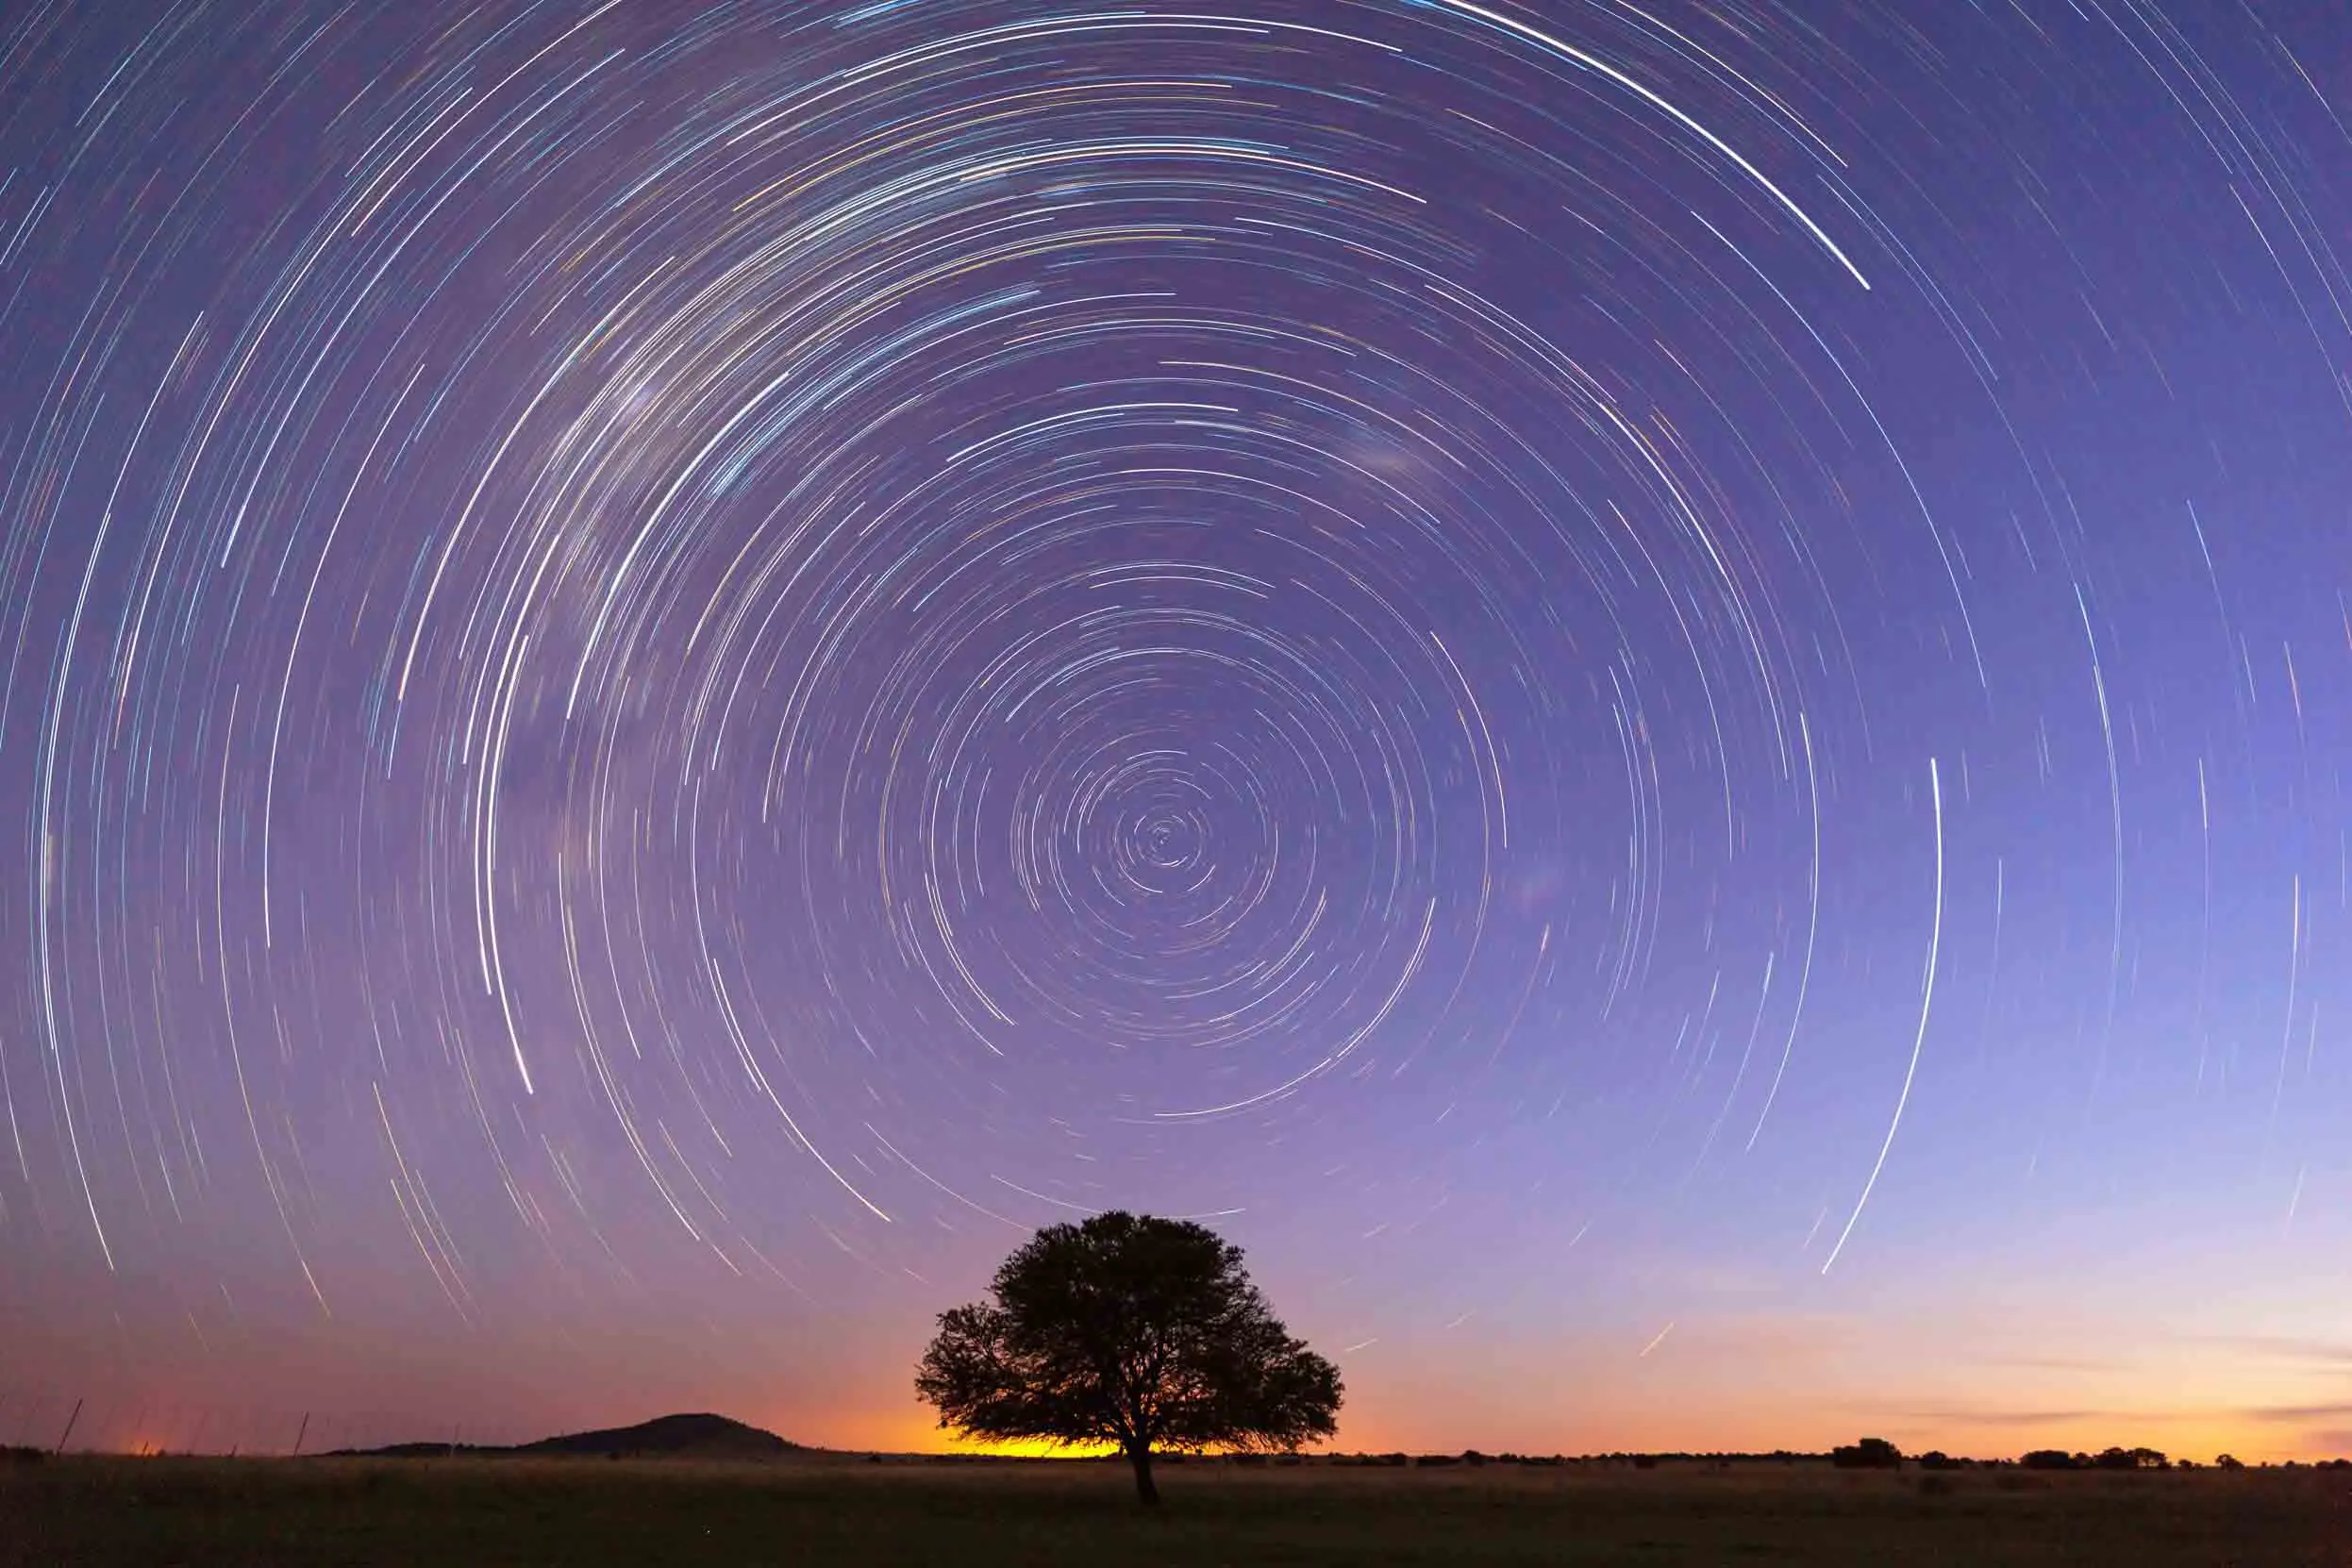 Silhouette of a tree along a flat horizon, set against a purple and orange sky marked by concentric circles of startrails.